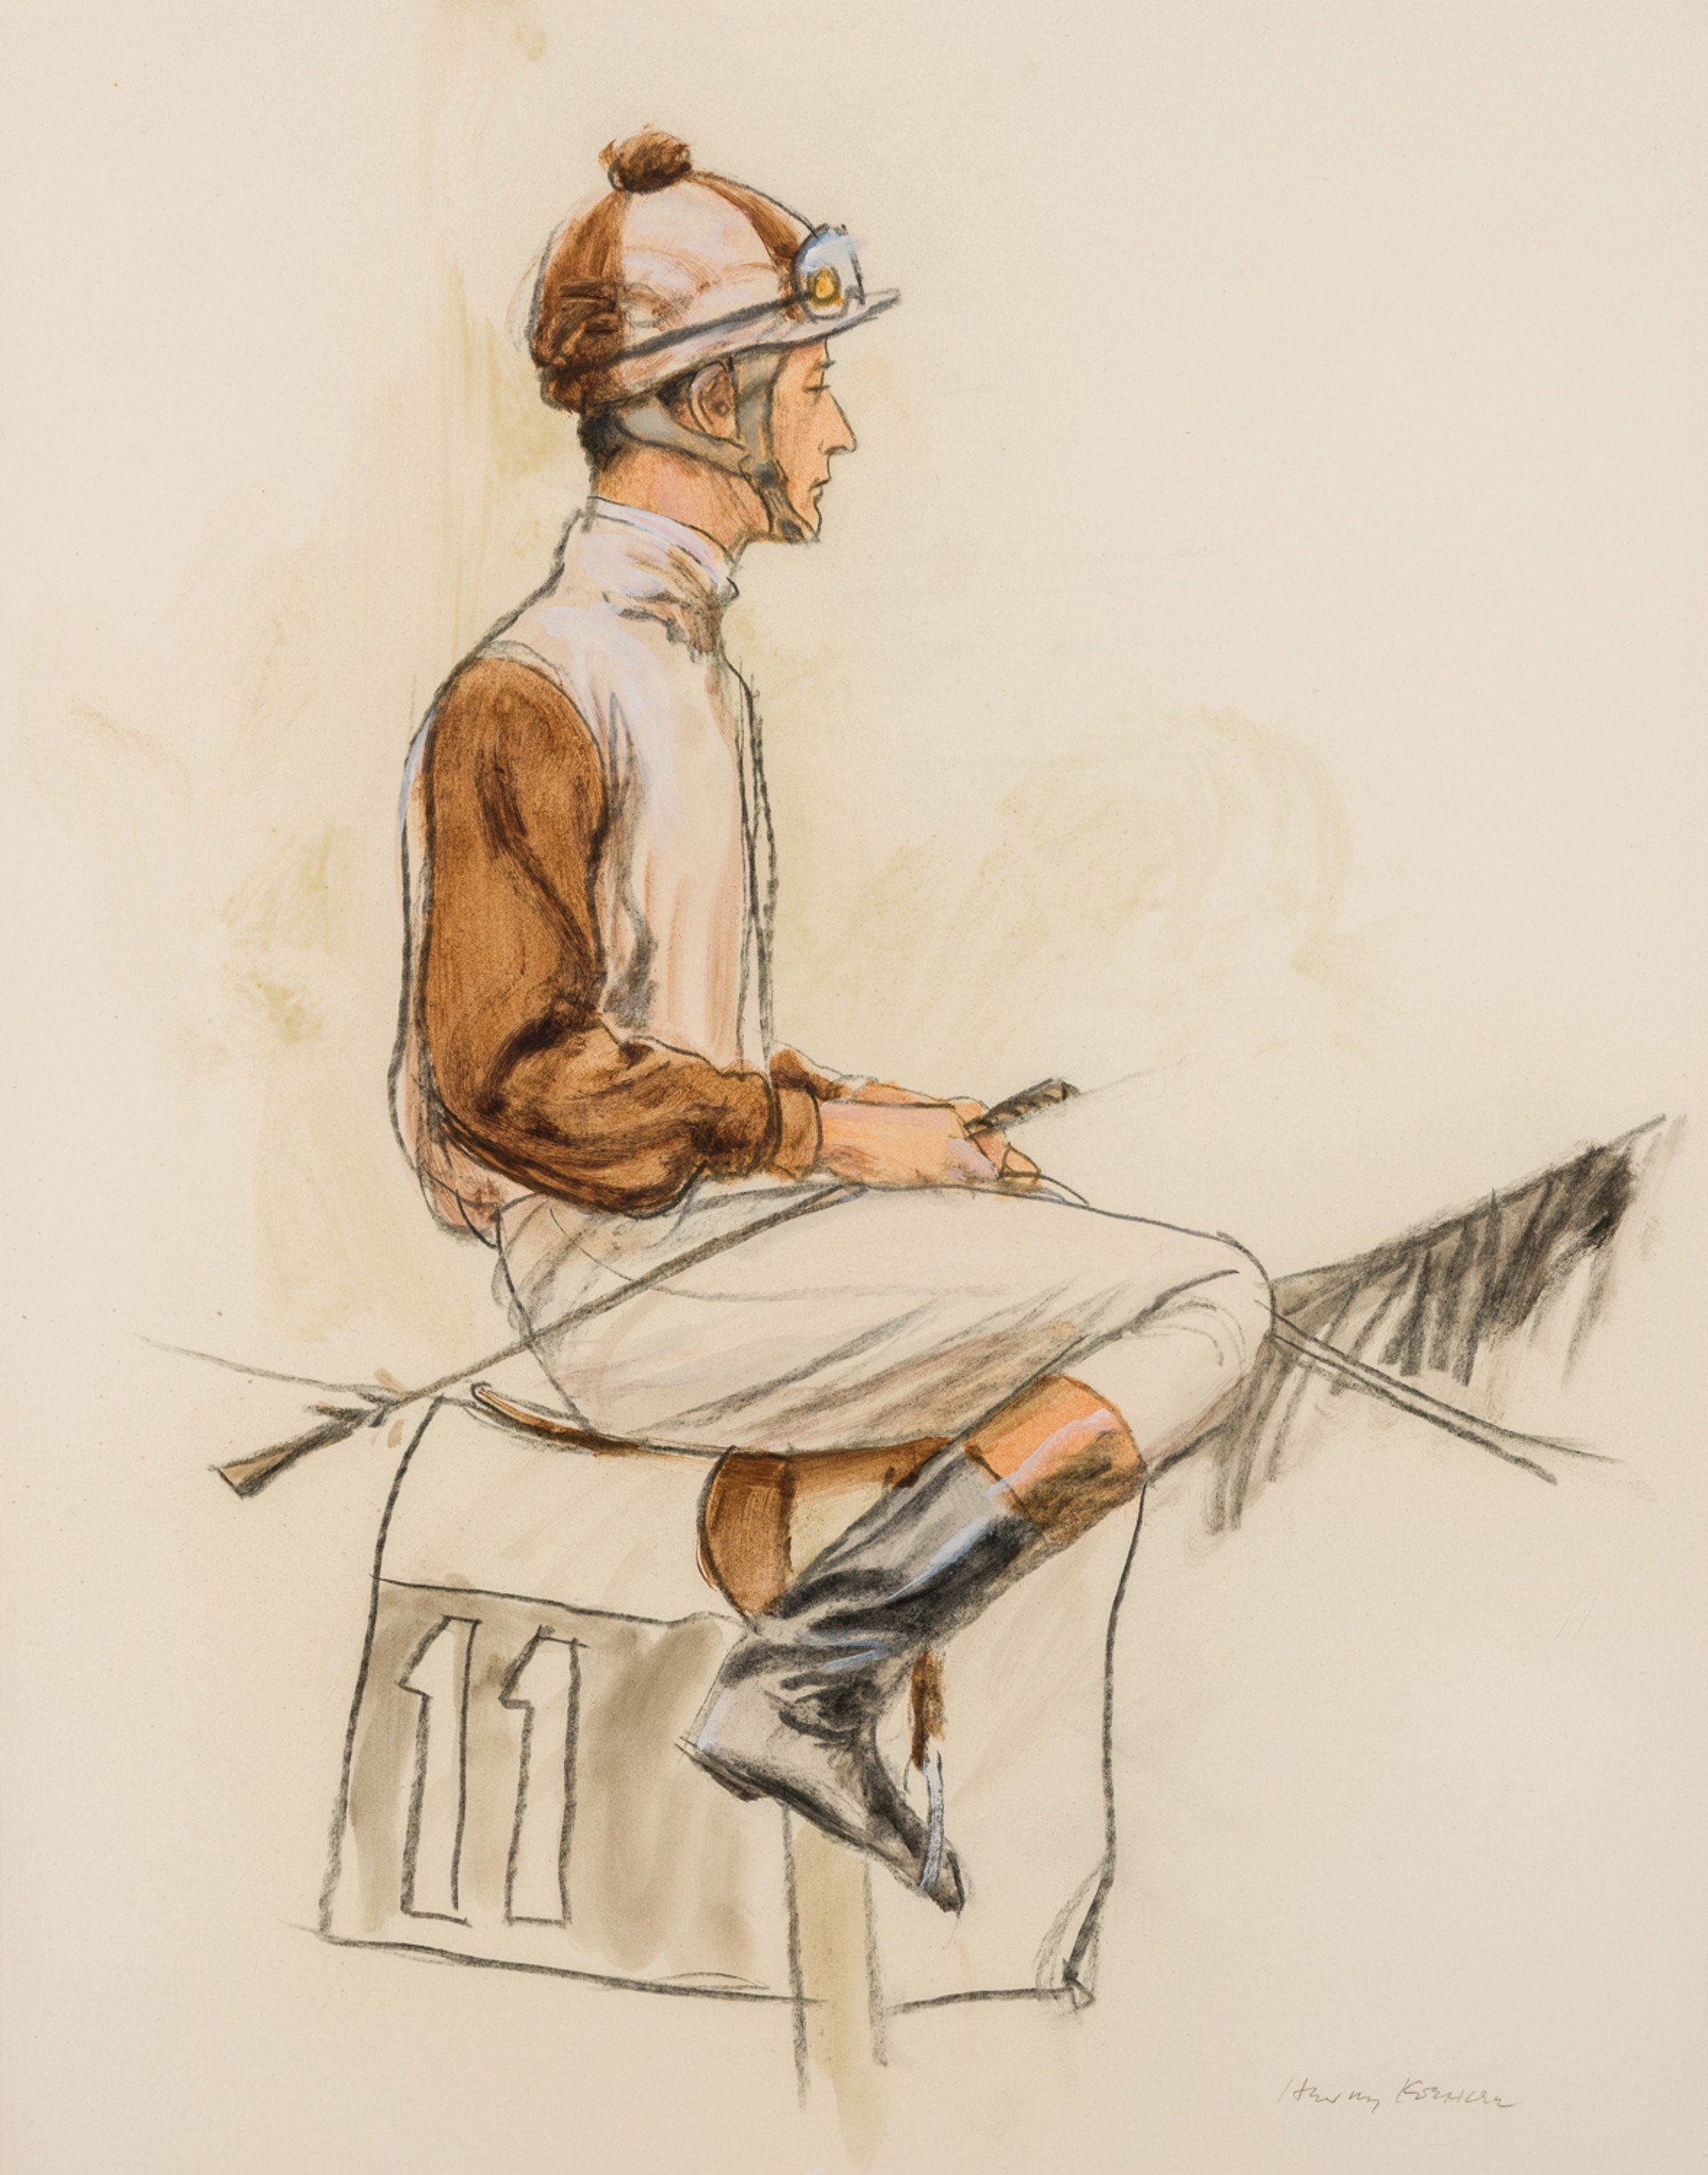 BRAULIO BAEZA AT THE ARC, COLOURS OF J.W. GALBREATH (DARBY DAN) by Henry Koehler